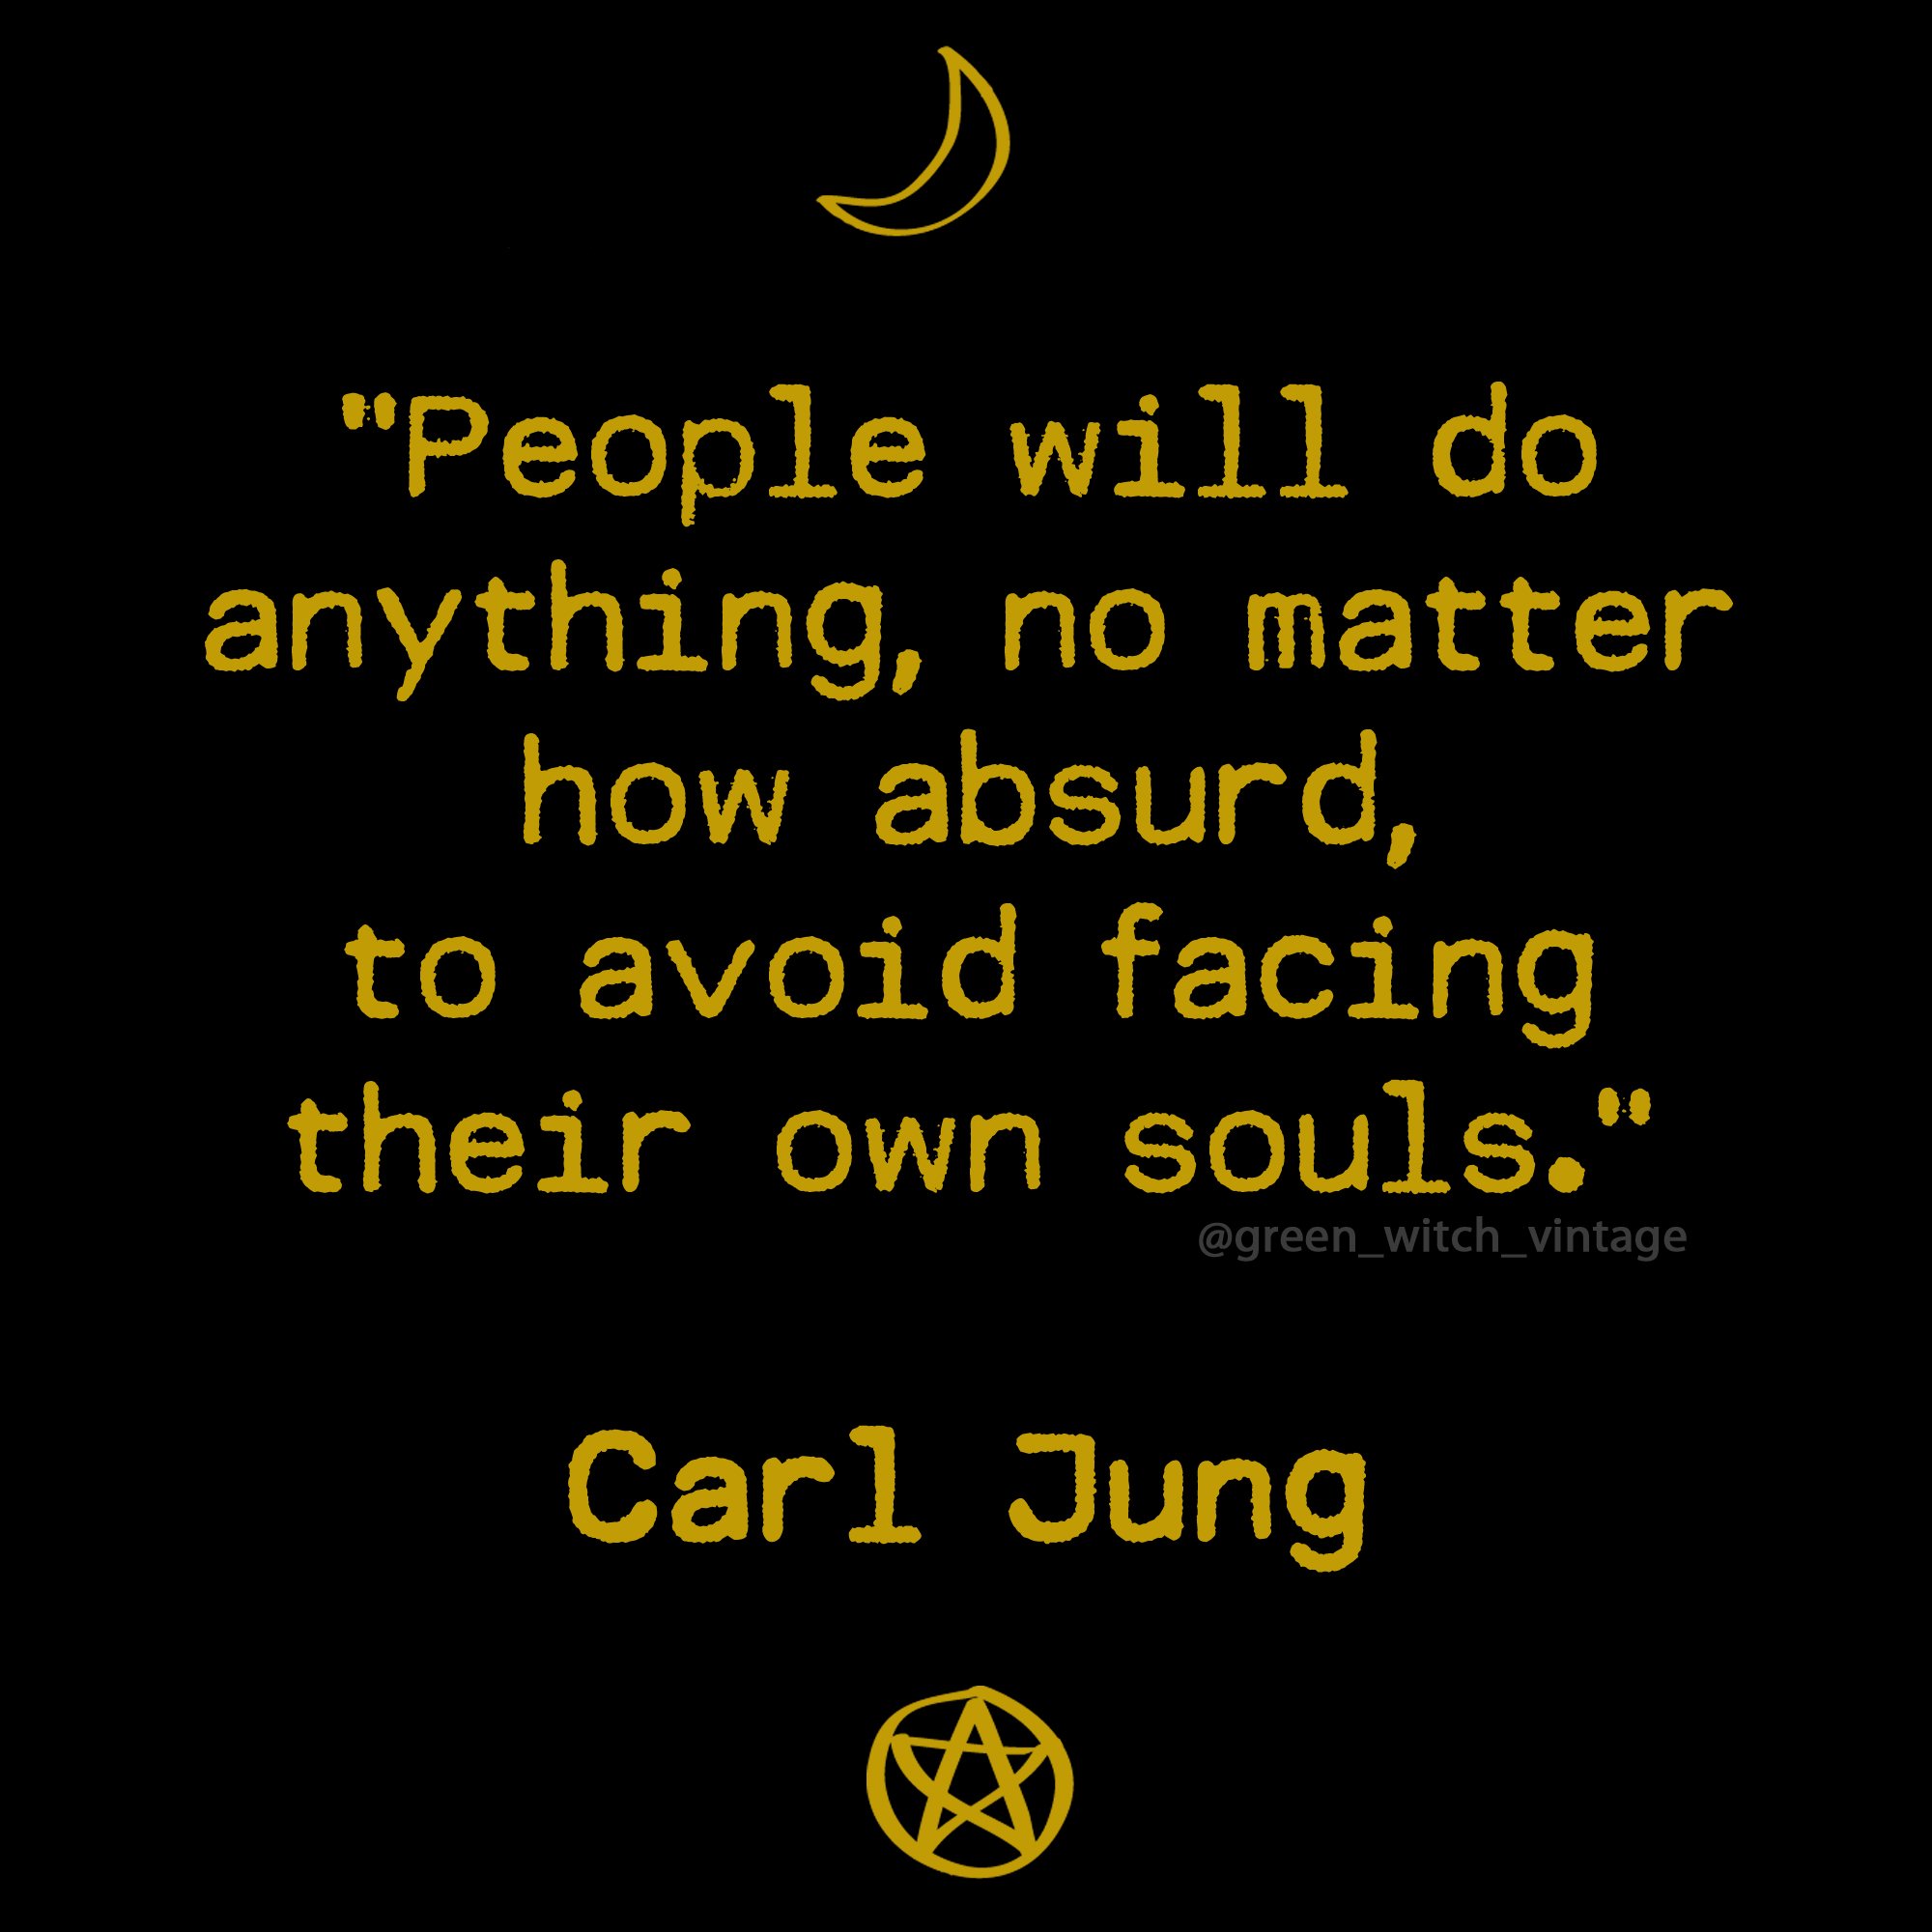 #carljung #jungquote #quotes #witchyquotes #paganquotes #naturequotes #greenwitchquotes #qotd #magicquote #greenwitchquote